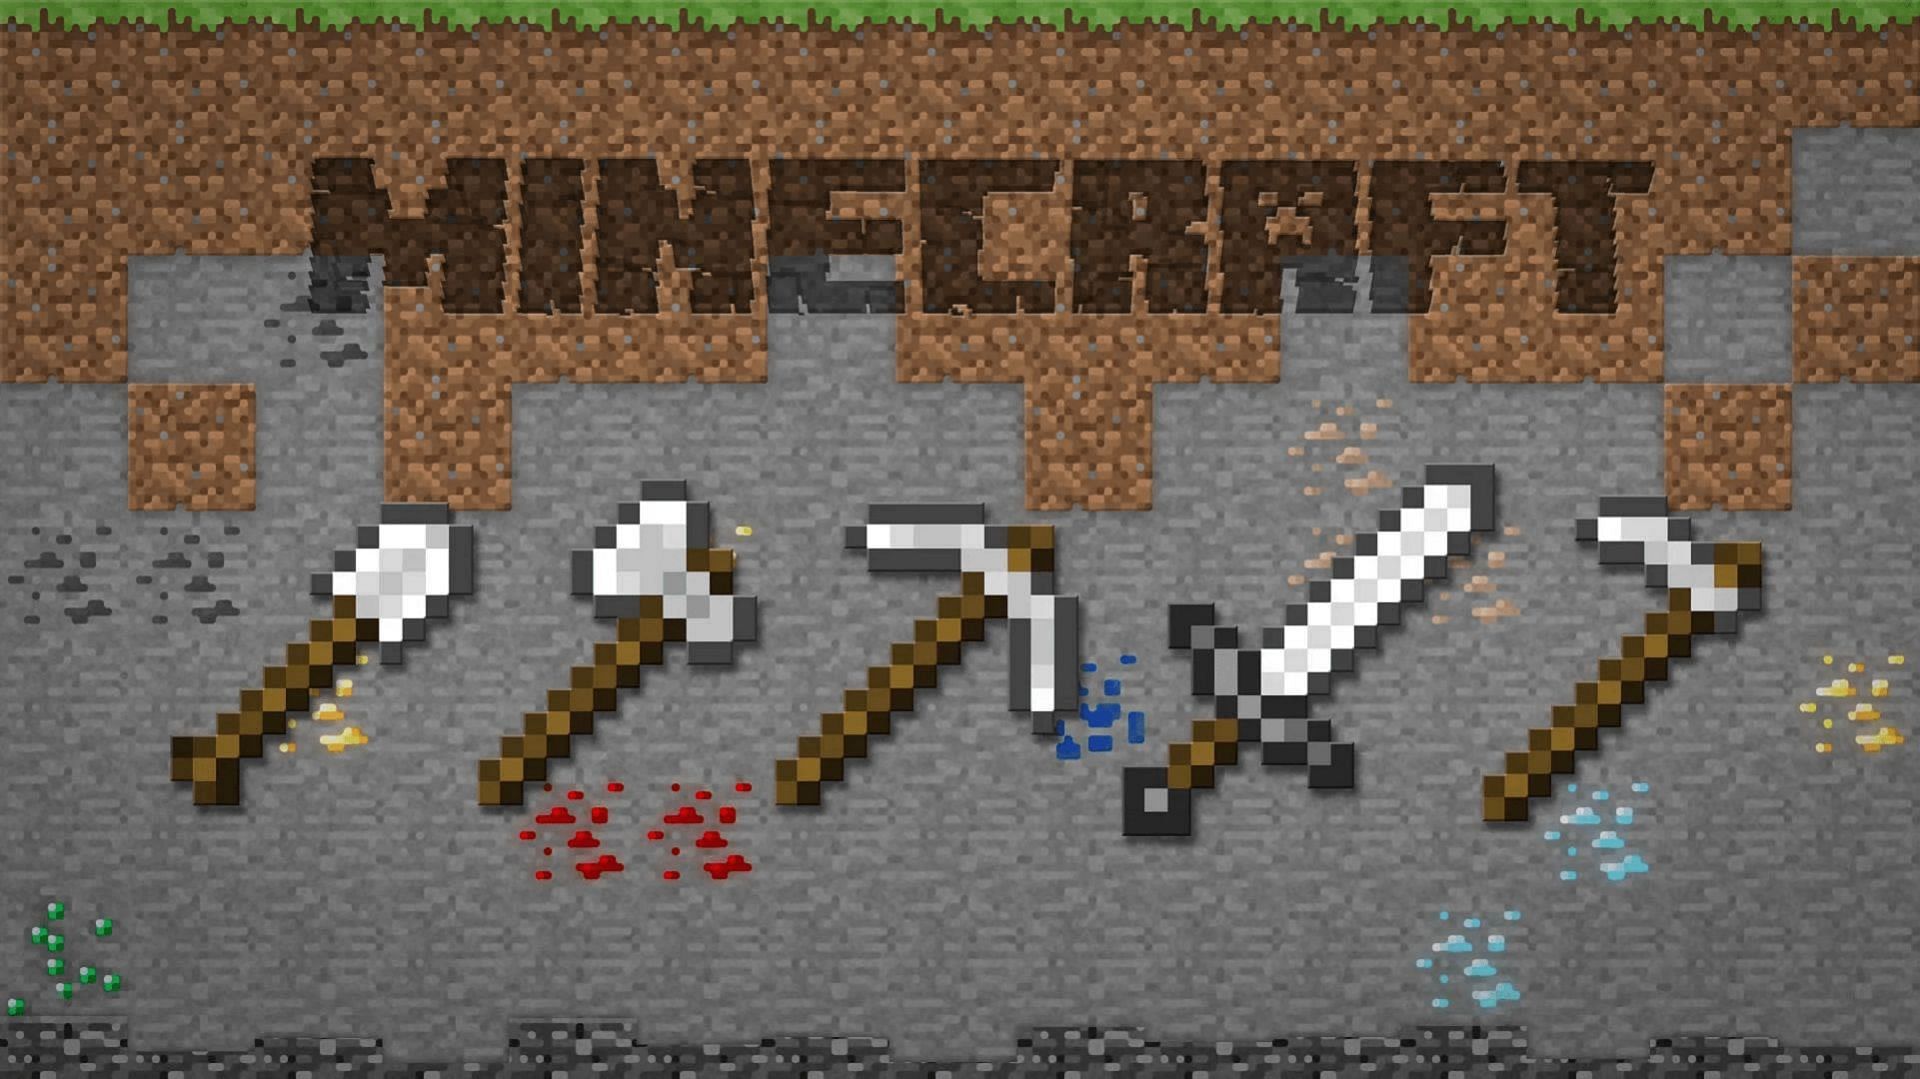 Minecraft players won't get far without quality tools (Image via Mojang)